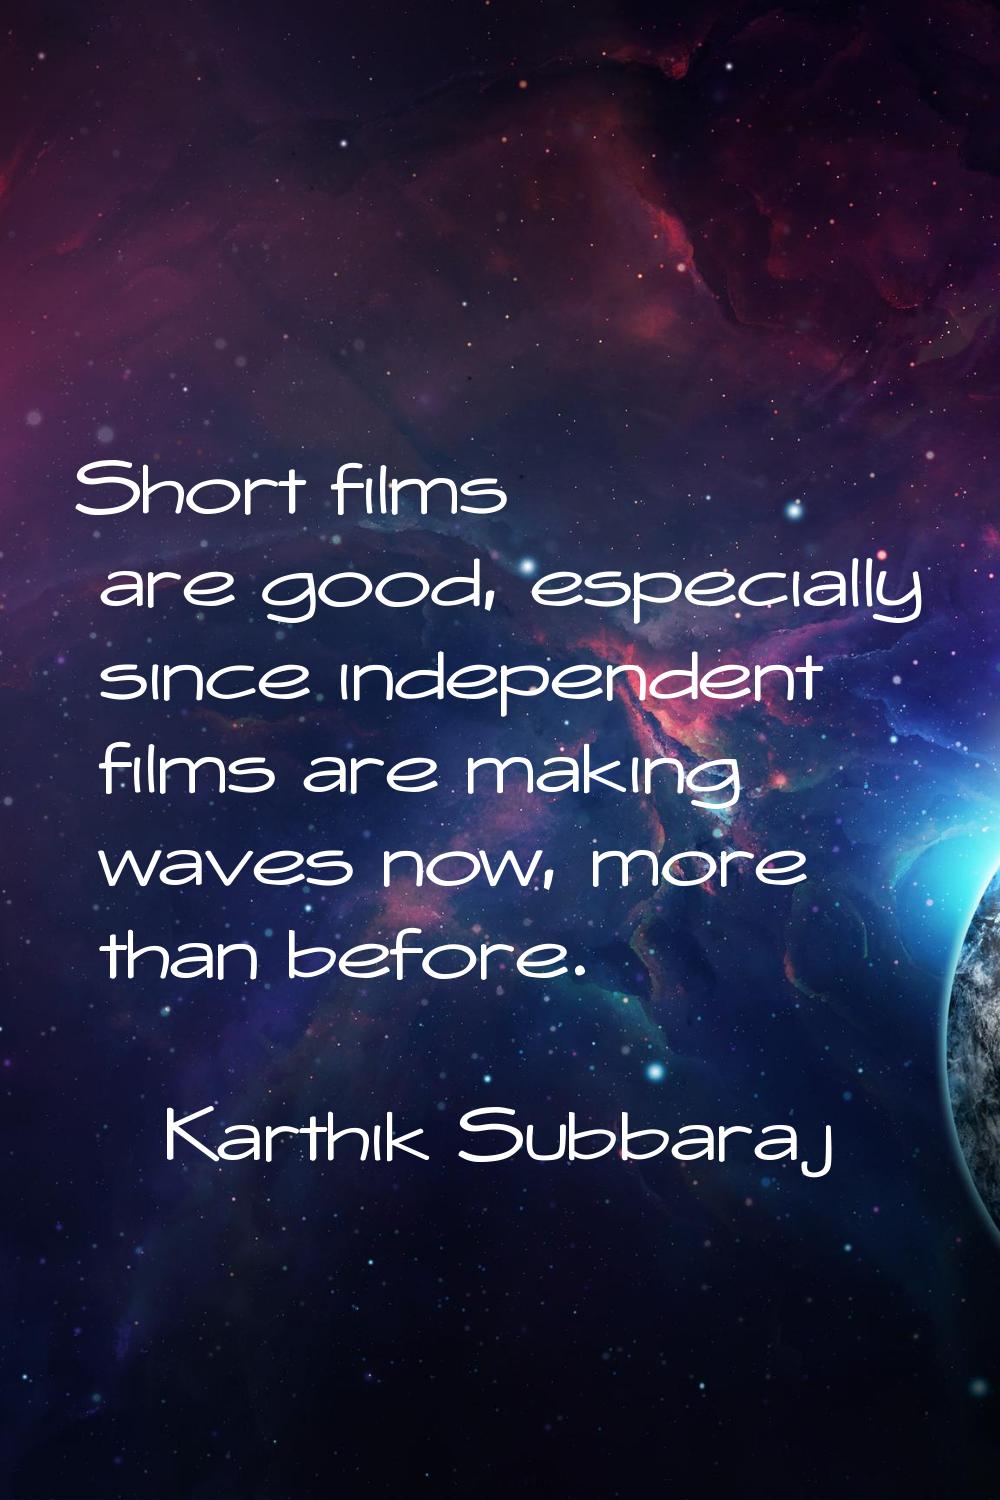 Short films are good, especially since independent films are making waves now, more than before.